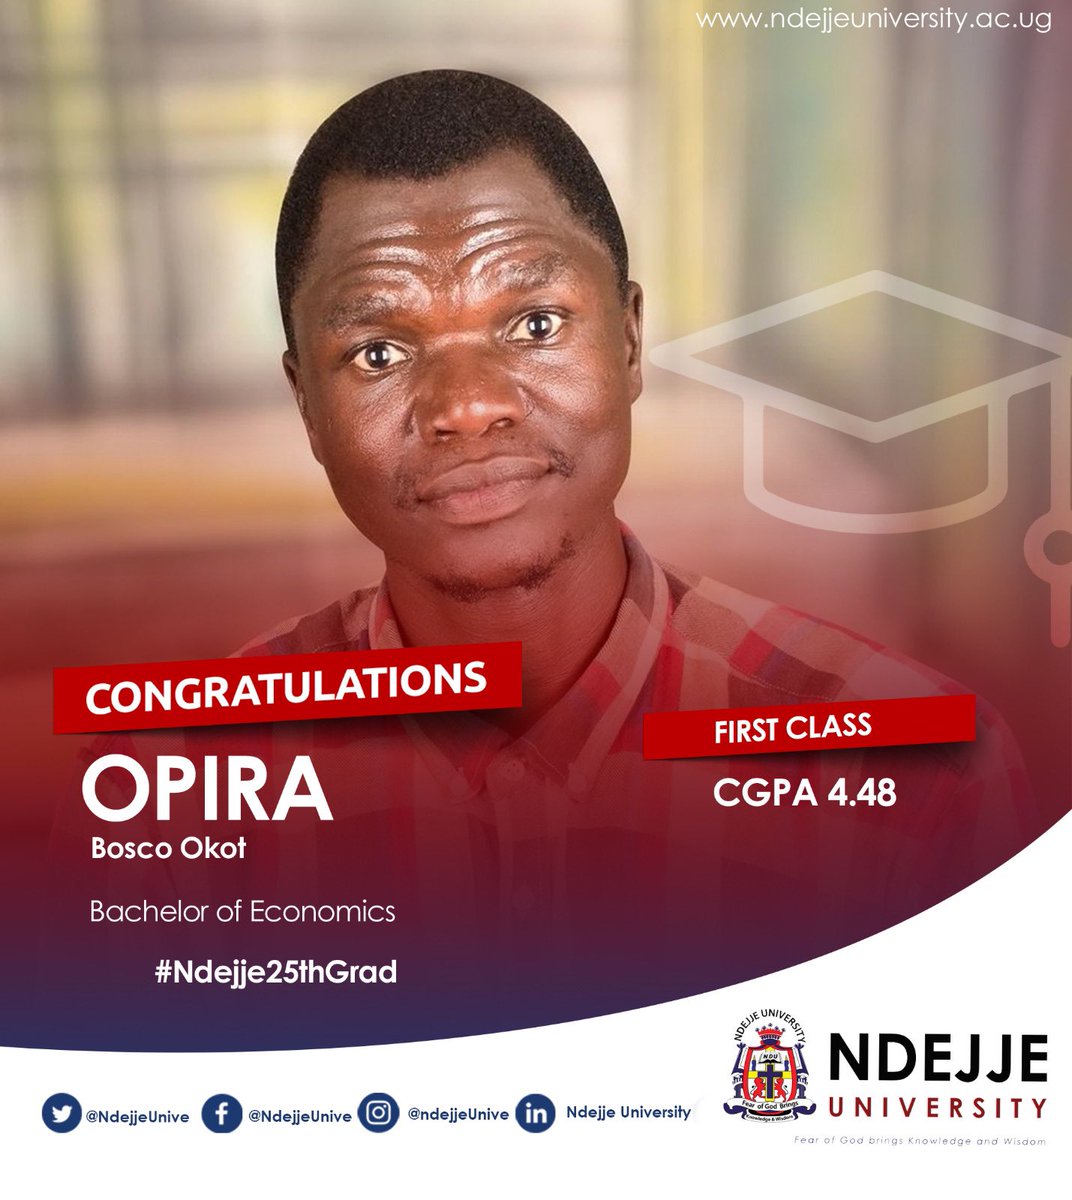 Congratulations @Opira01 for the great work done. I am ever grateful and proud of your hard work and commitment. The sky is the limit for you, brother, and may your dreams come true. 💪 @WindleUganda @Refugees